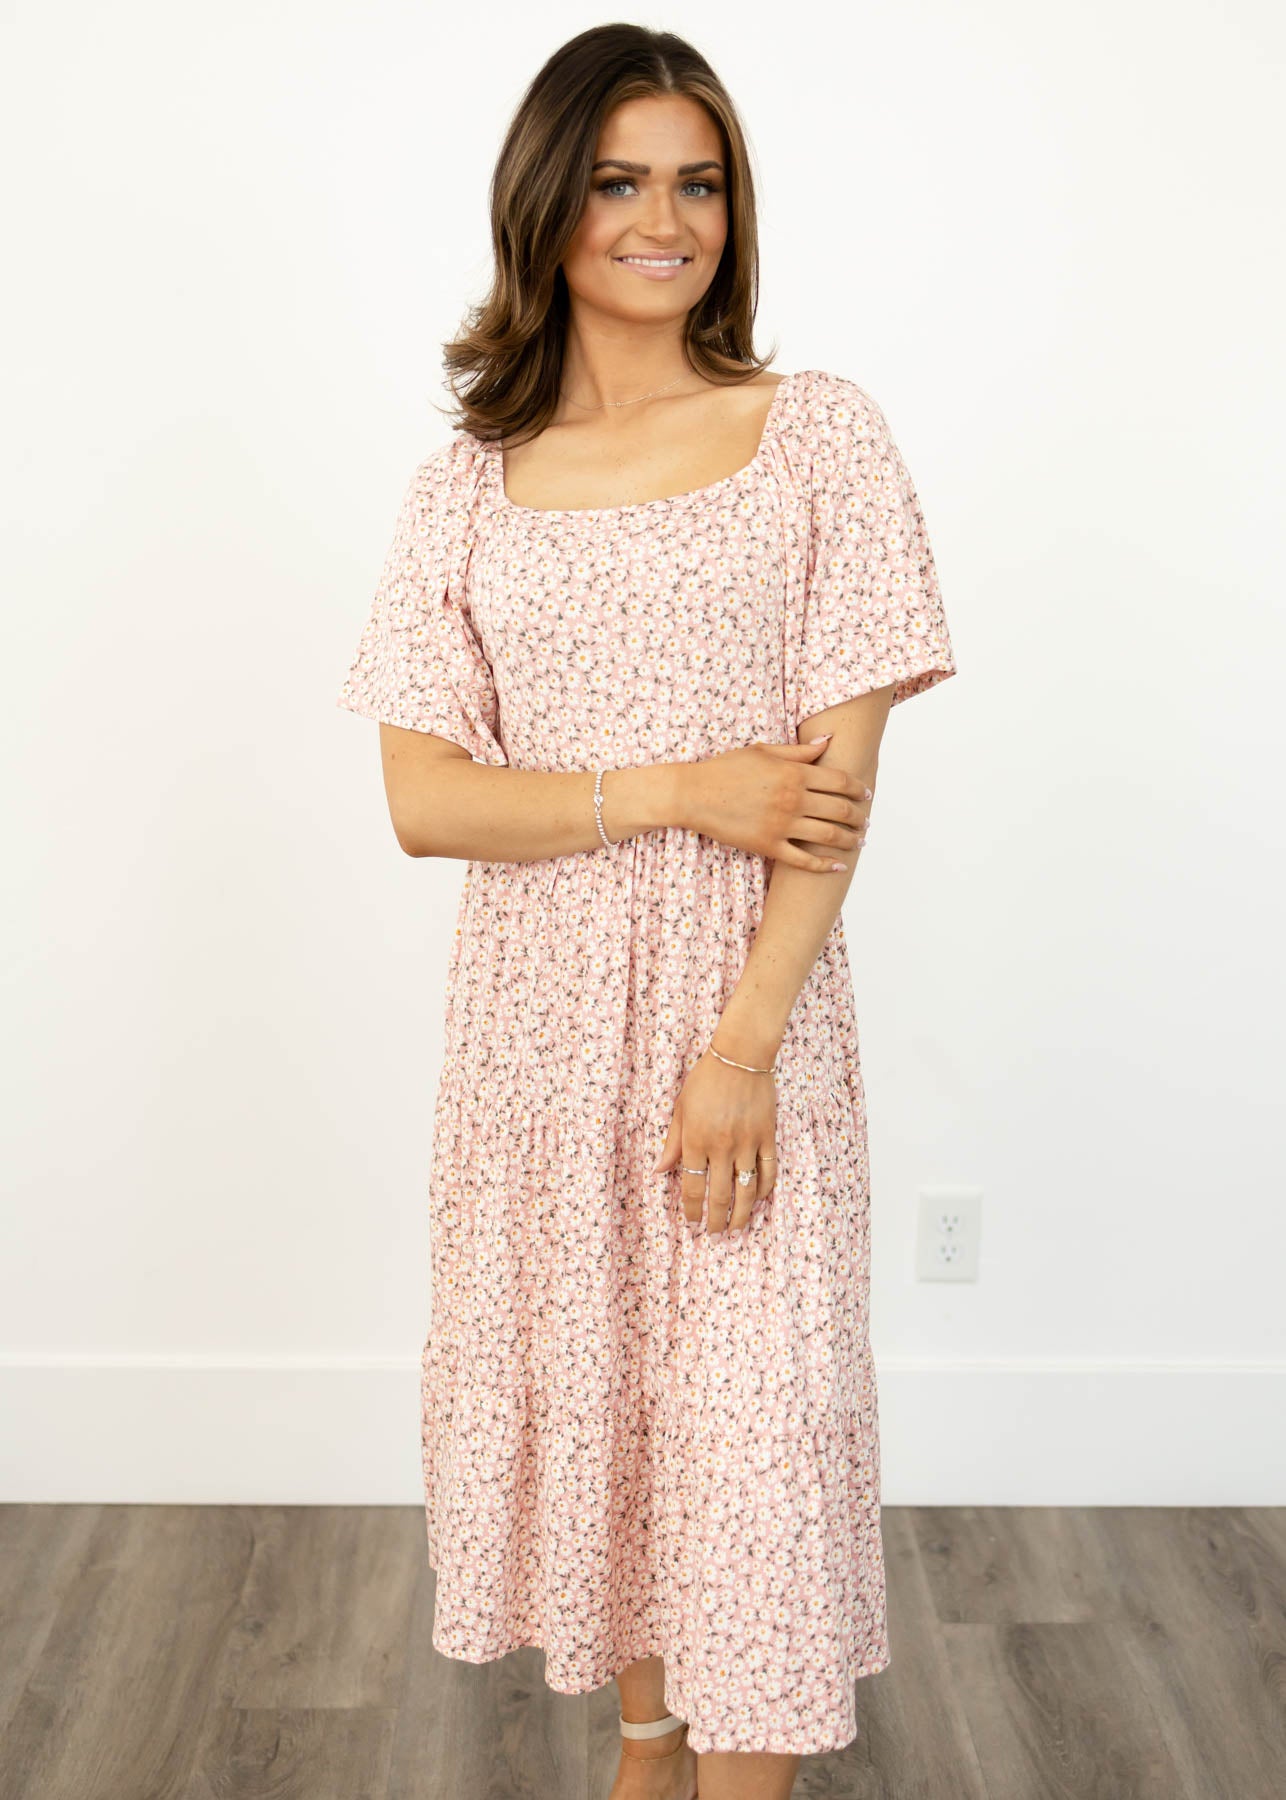 Blush floral dress with a square neck